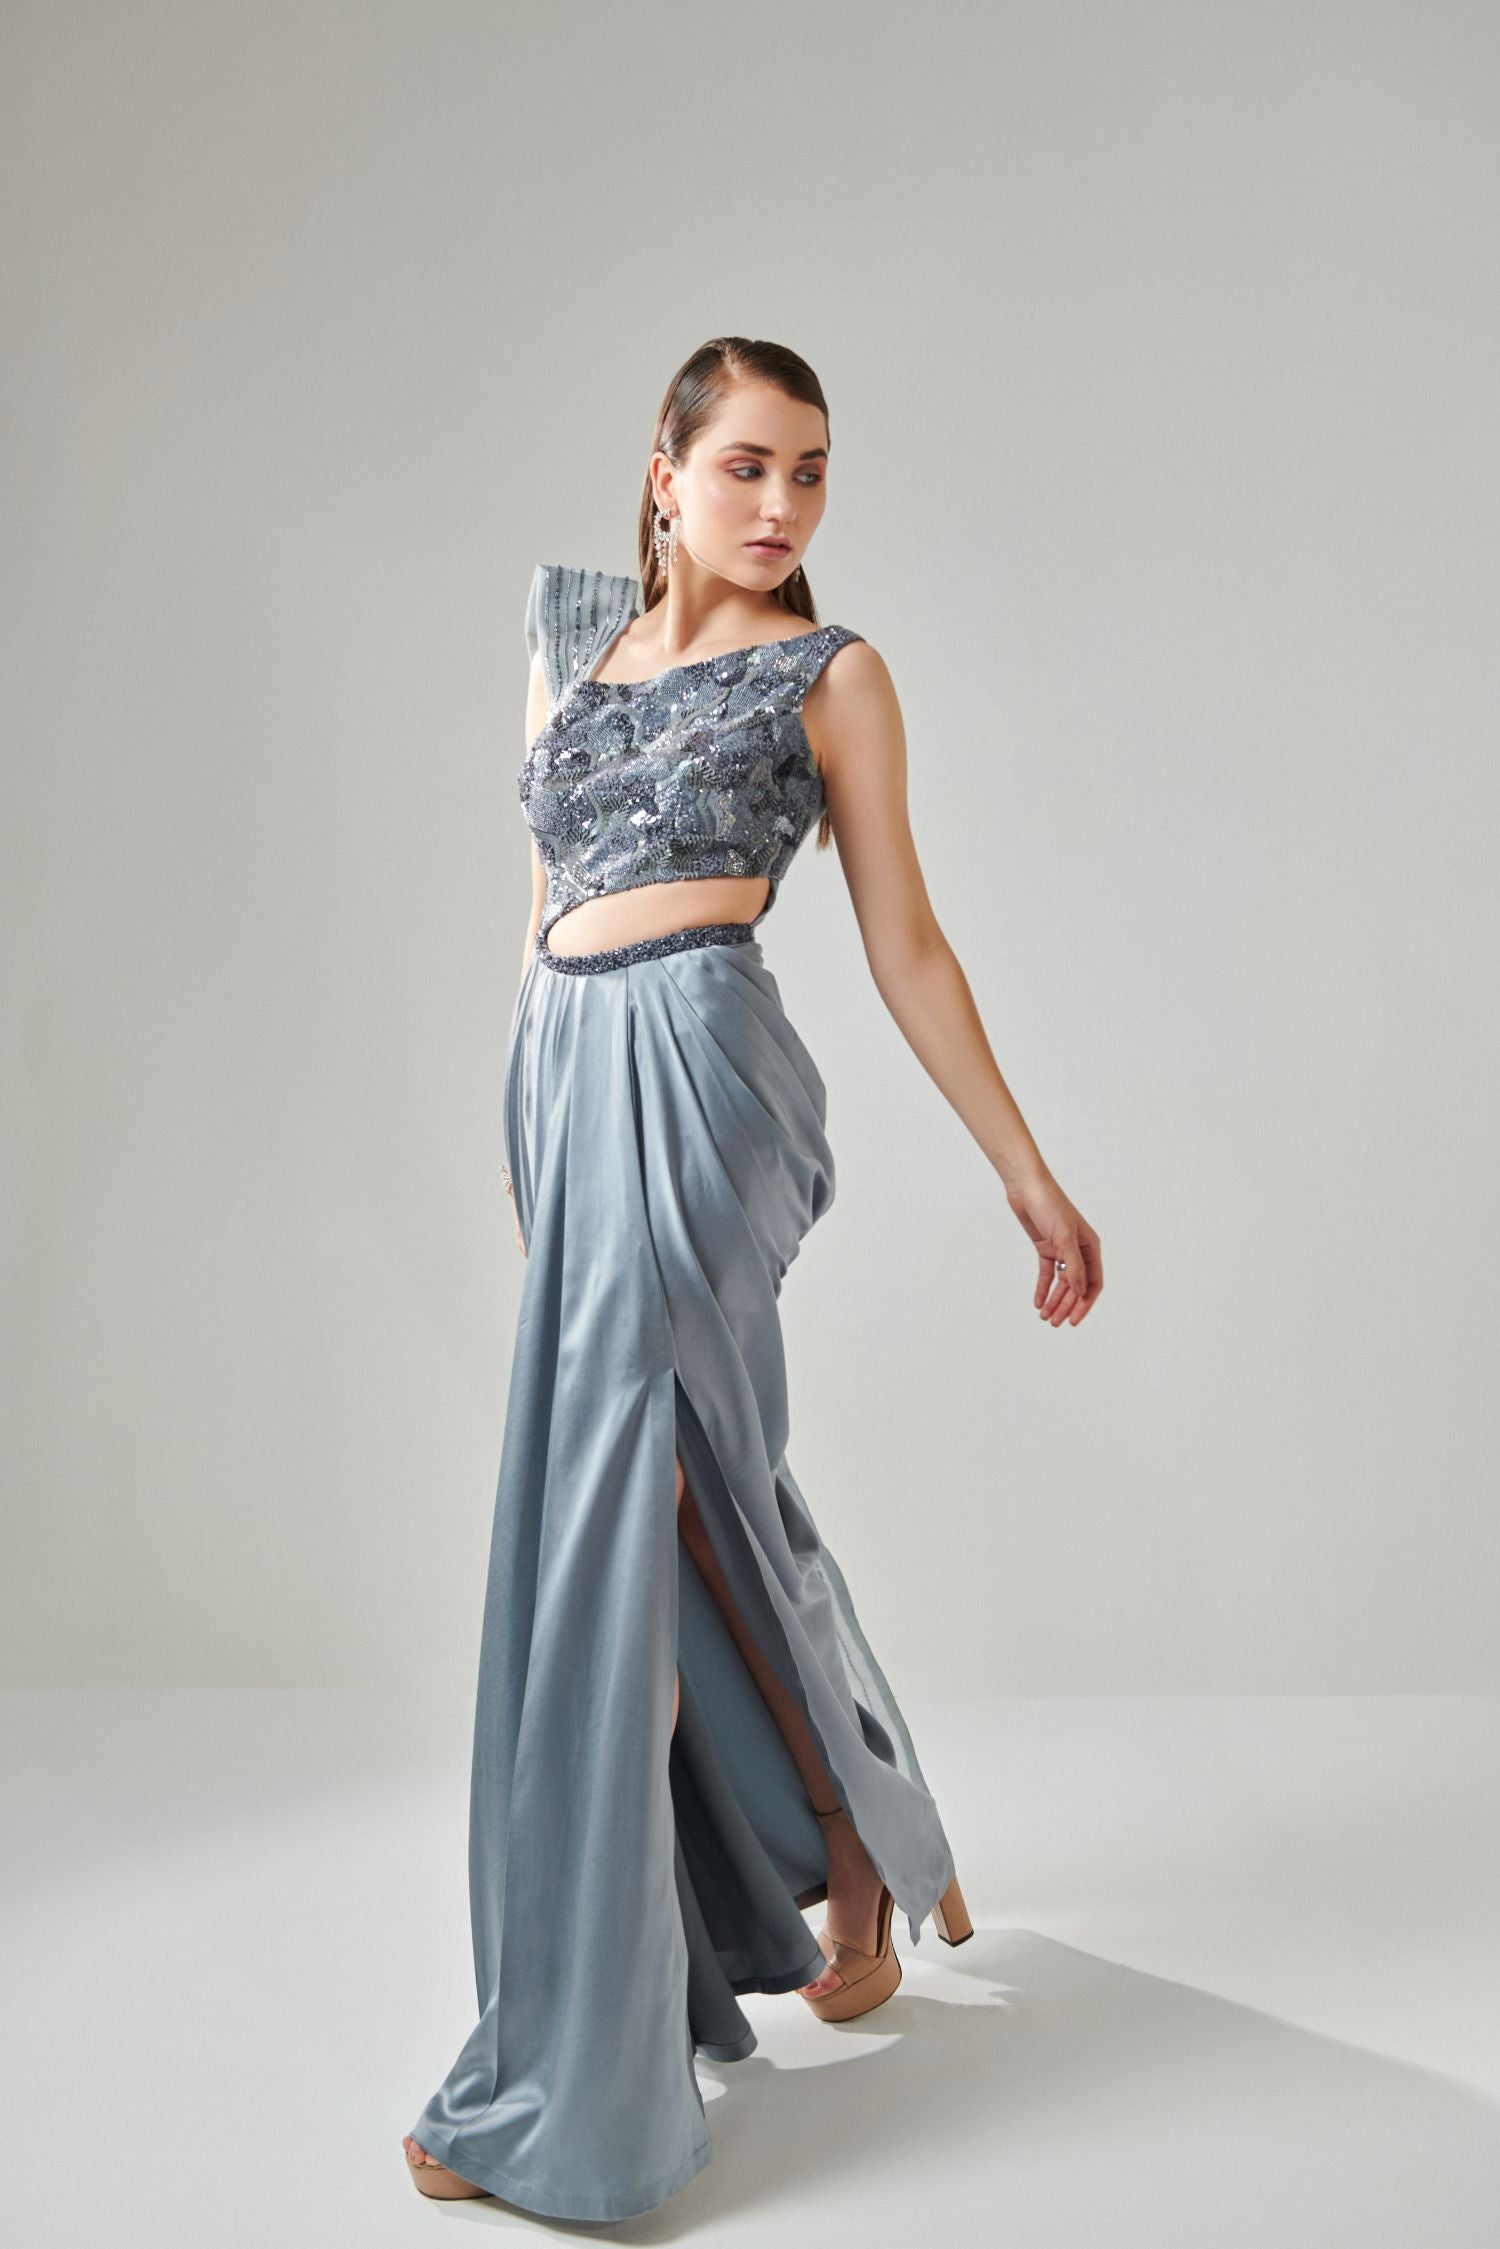 Ash Grey Drape Saree Gown With Embellished 3-D Palla